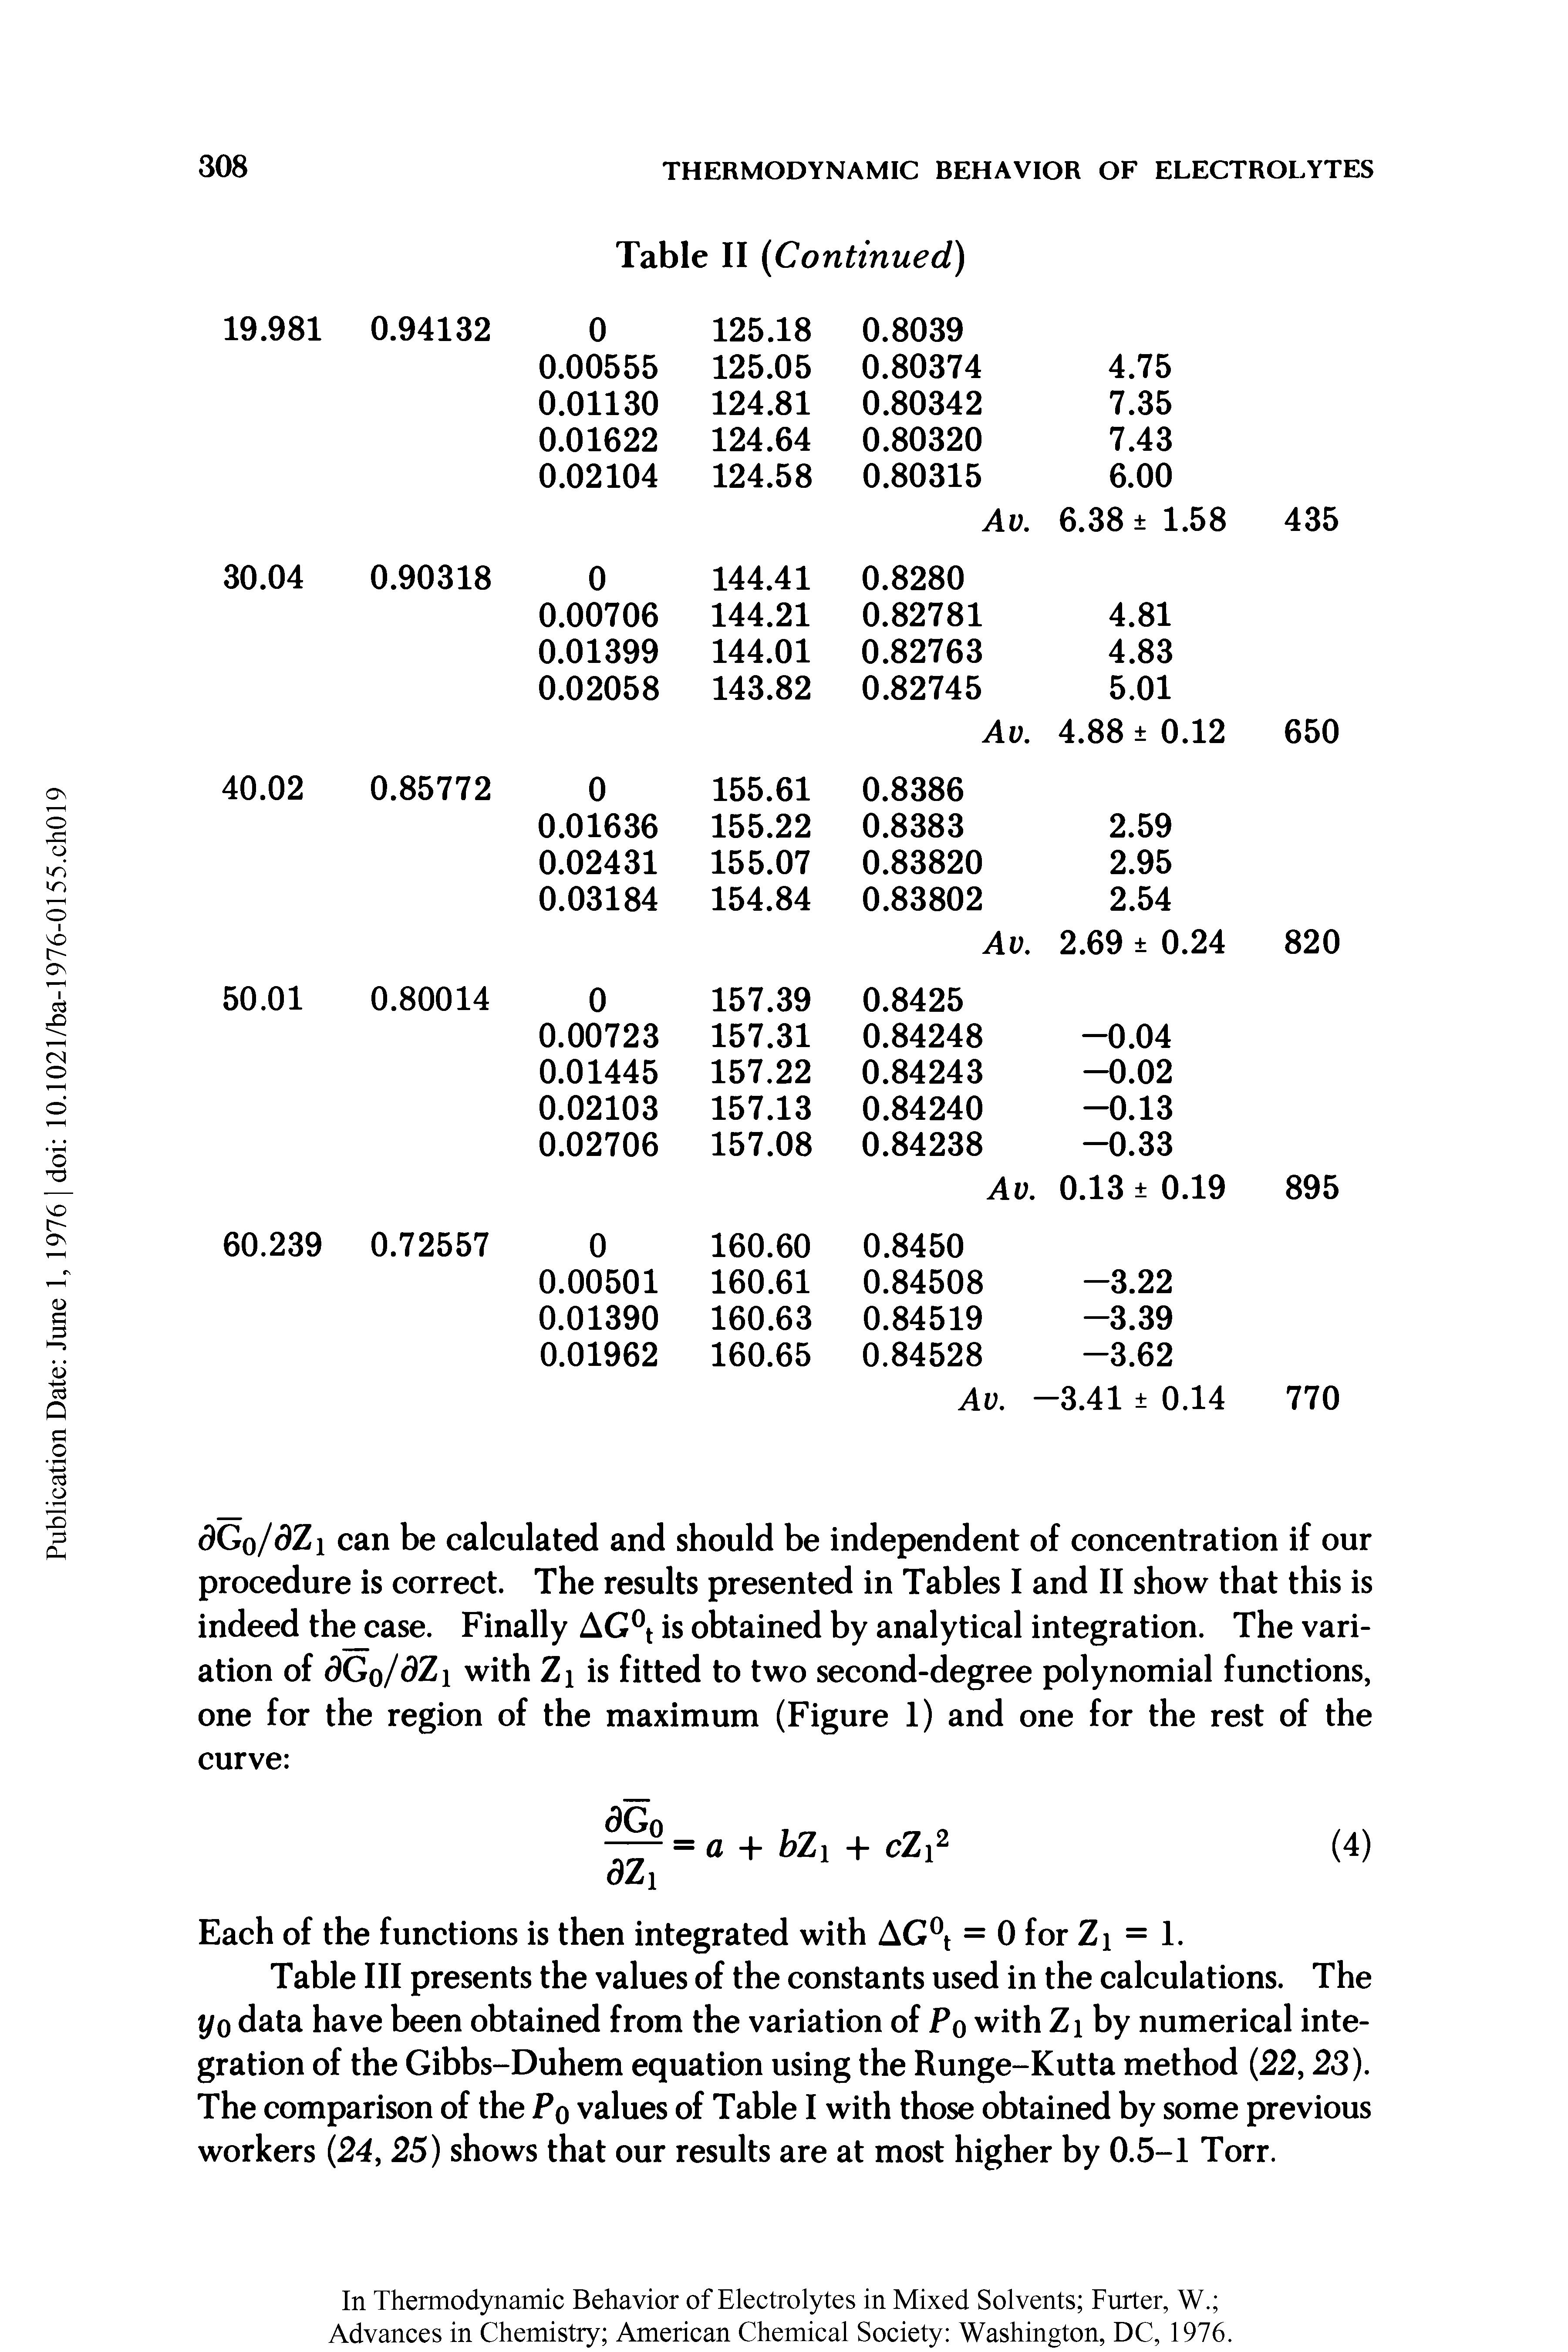 Table III presents the values of the constants used in the calculations. The t/o data have been obtained from the variation of Pq with Z by numerical integration of the Gibbs-Duhem equation using the Runge-Kutta method (22,23). The comparison of the Pq values of Table I with those obtained by some previous workers (24, 25) shows that our results are at most higher by 0.5-1 Torr.